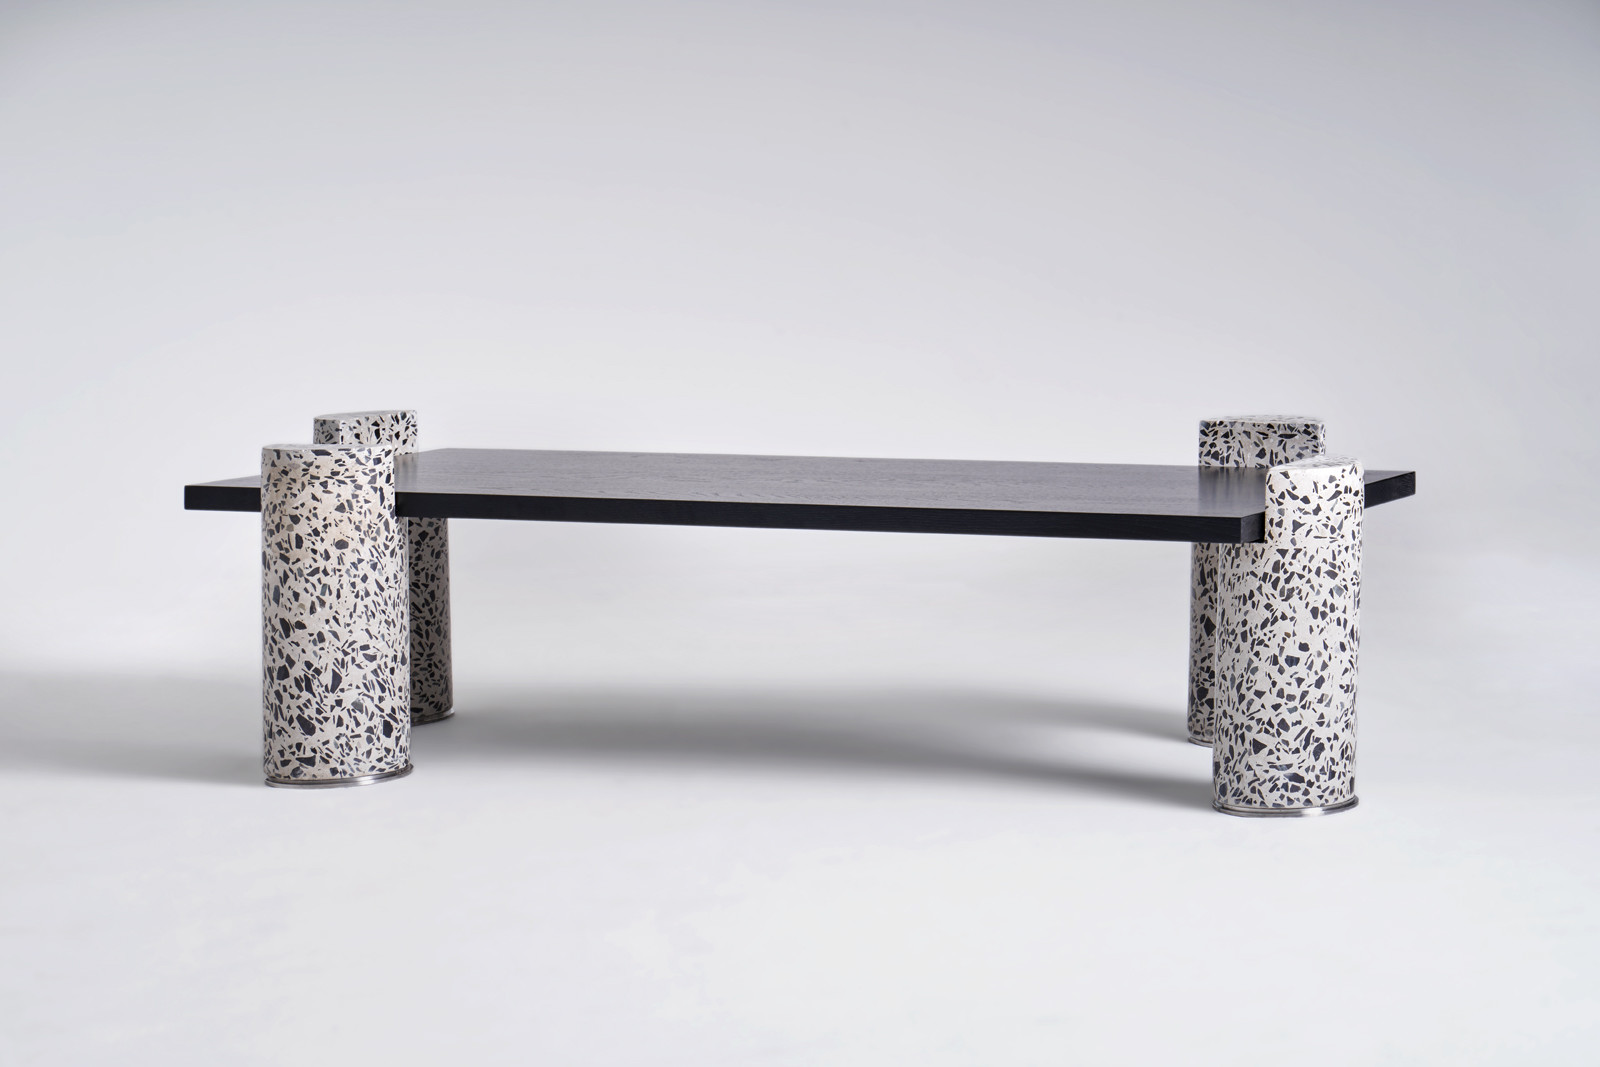 Ledge,2019. Coffee table. Limited edition. H 14.97 in. x W 23.63 in. x D 63 in. H 38 cm x W 60 cm x D 160 cm Concret, Stainless Steel, Ebonized Oak © Oliver Whyte